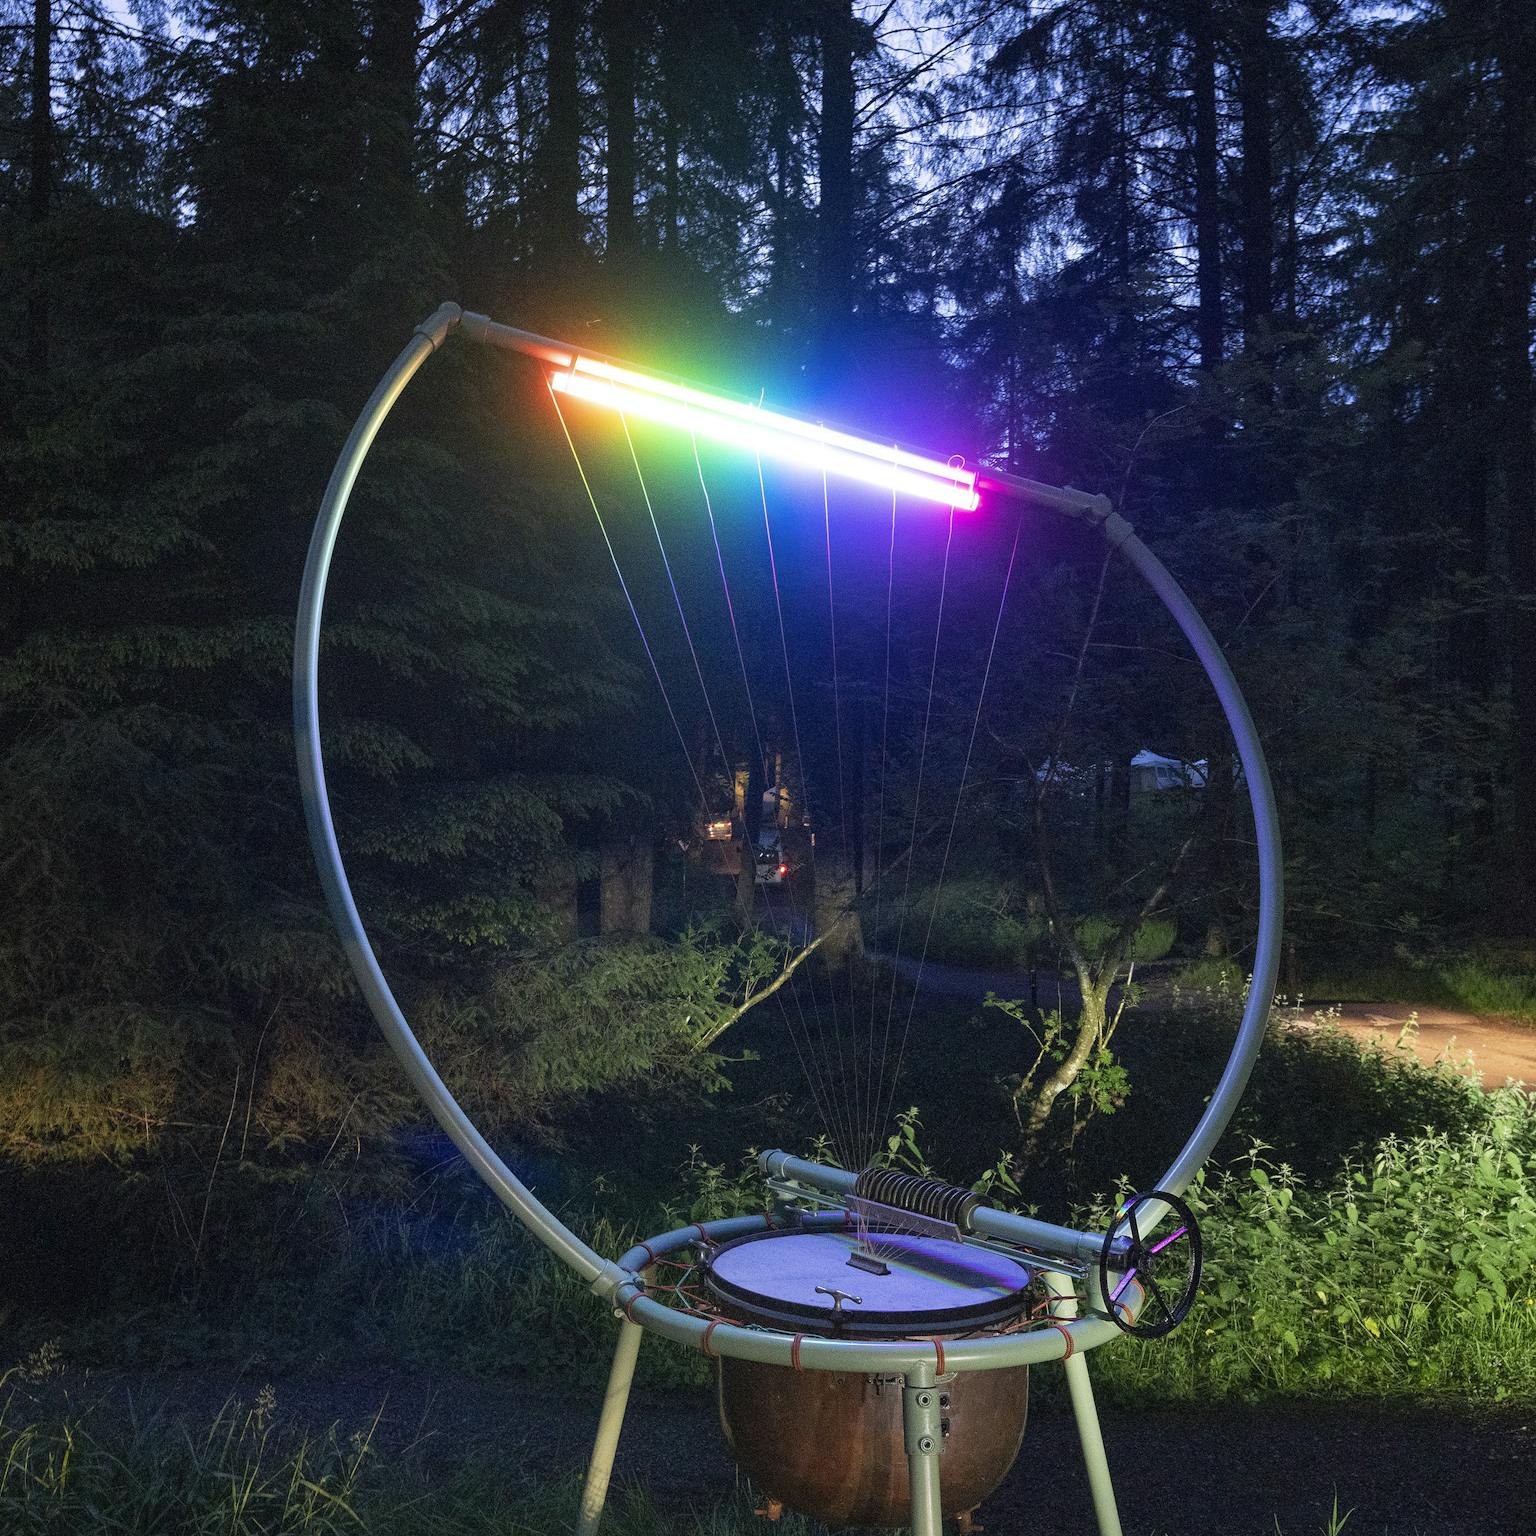 A Timpani Harp lit up in a rainbow of lighting in a wood in the dark